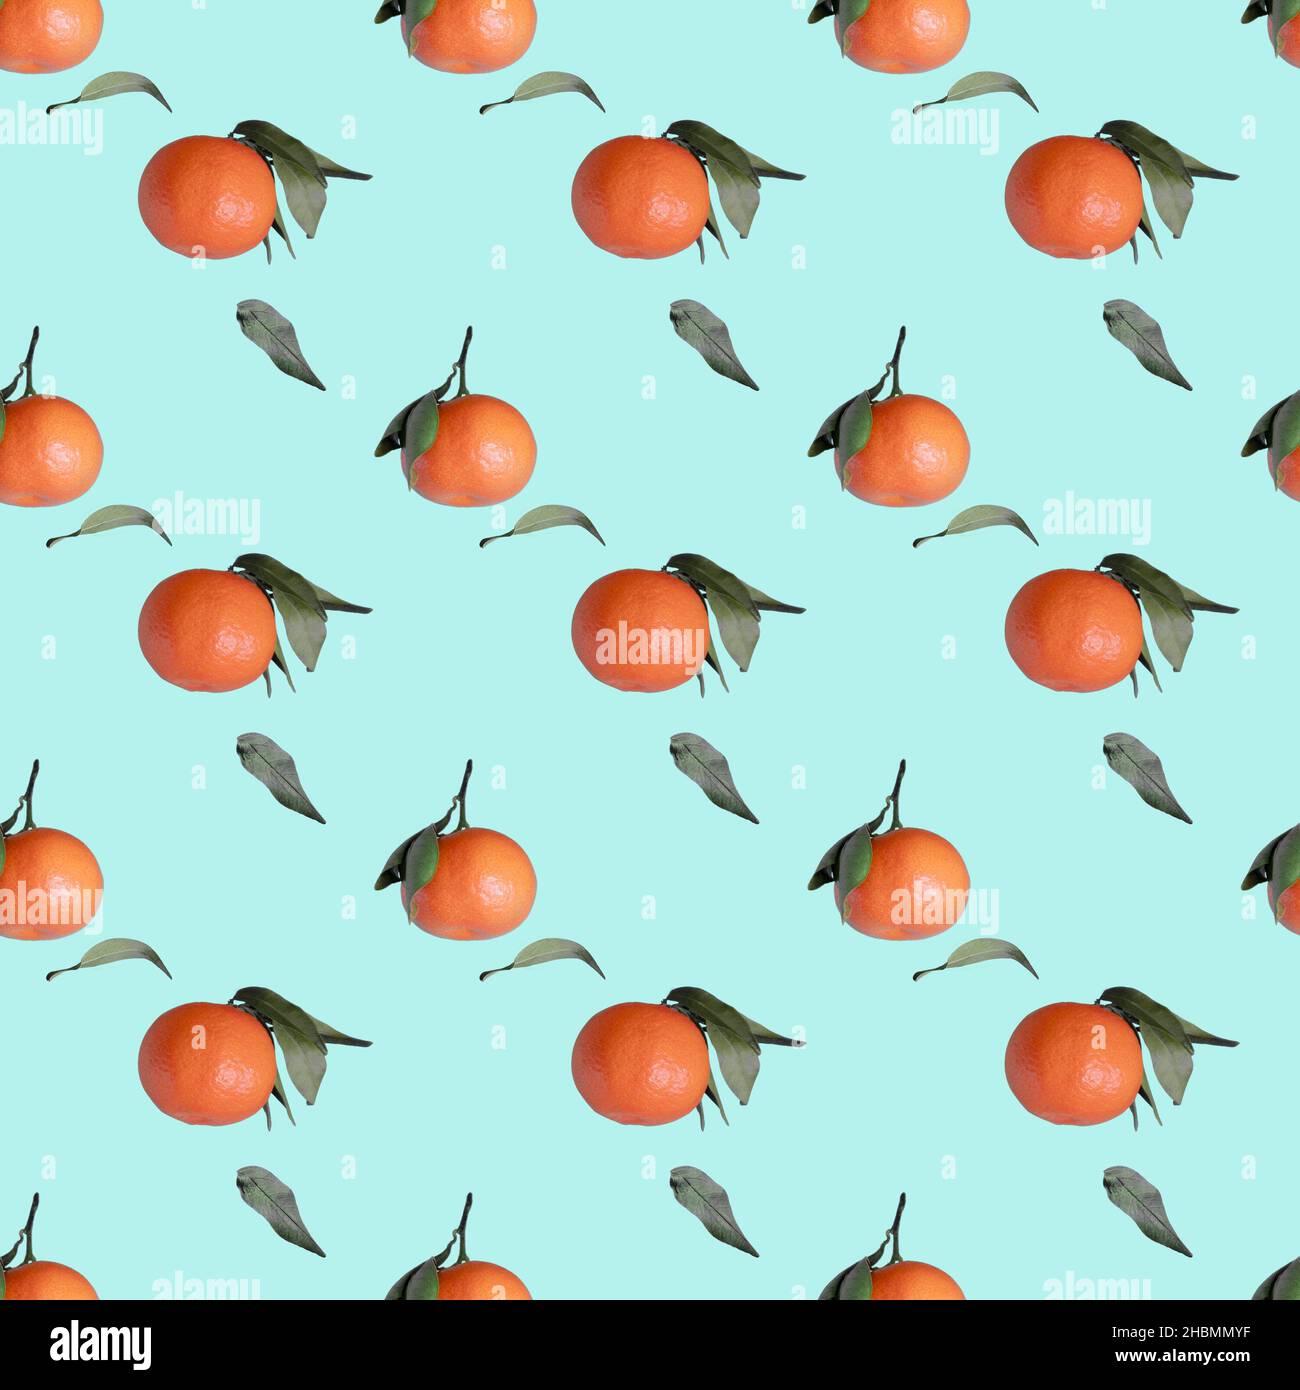 Tangerines seamless pattern with green leaves on light blue background Stock Photo